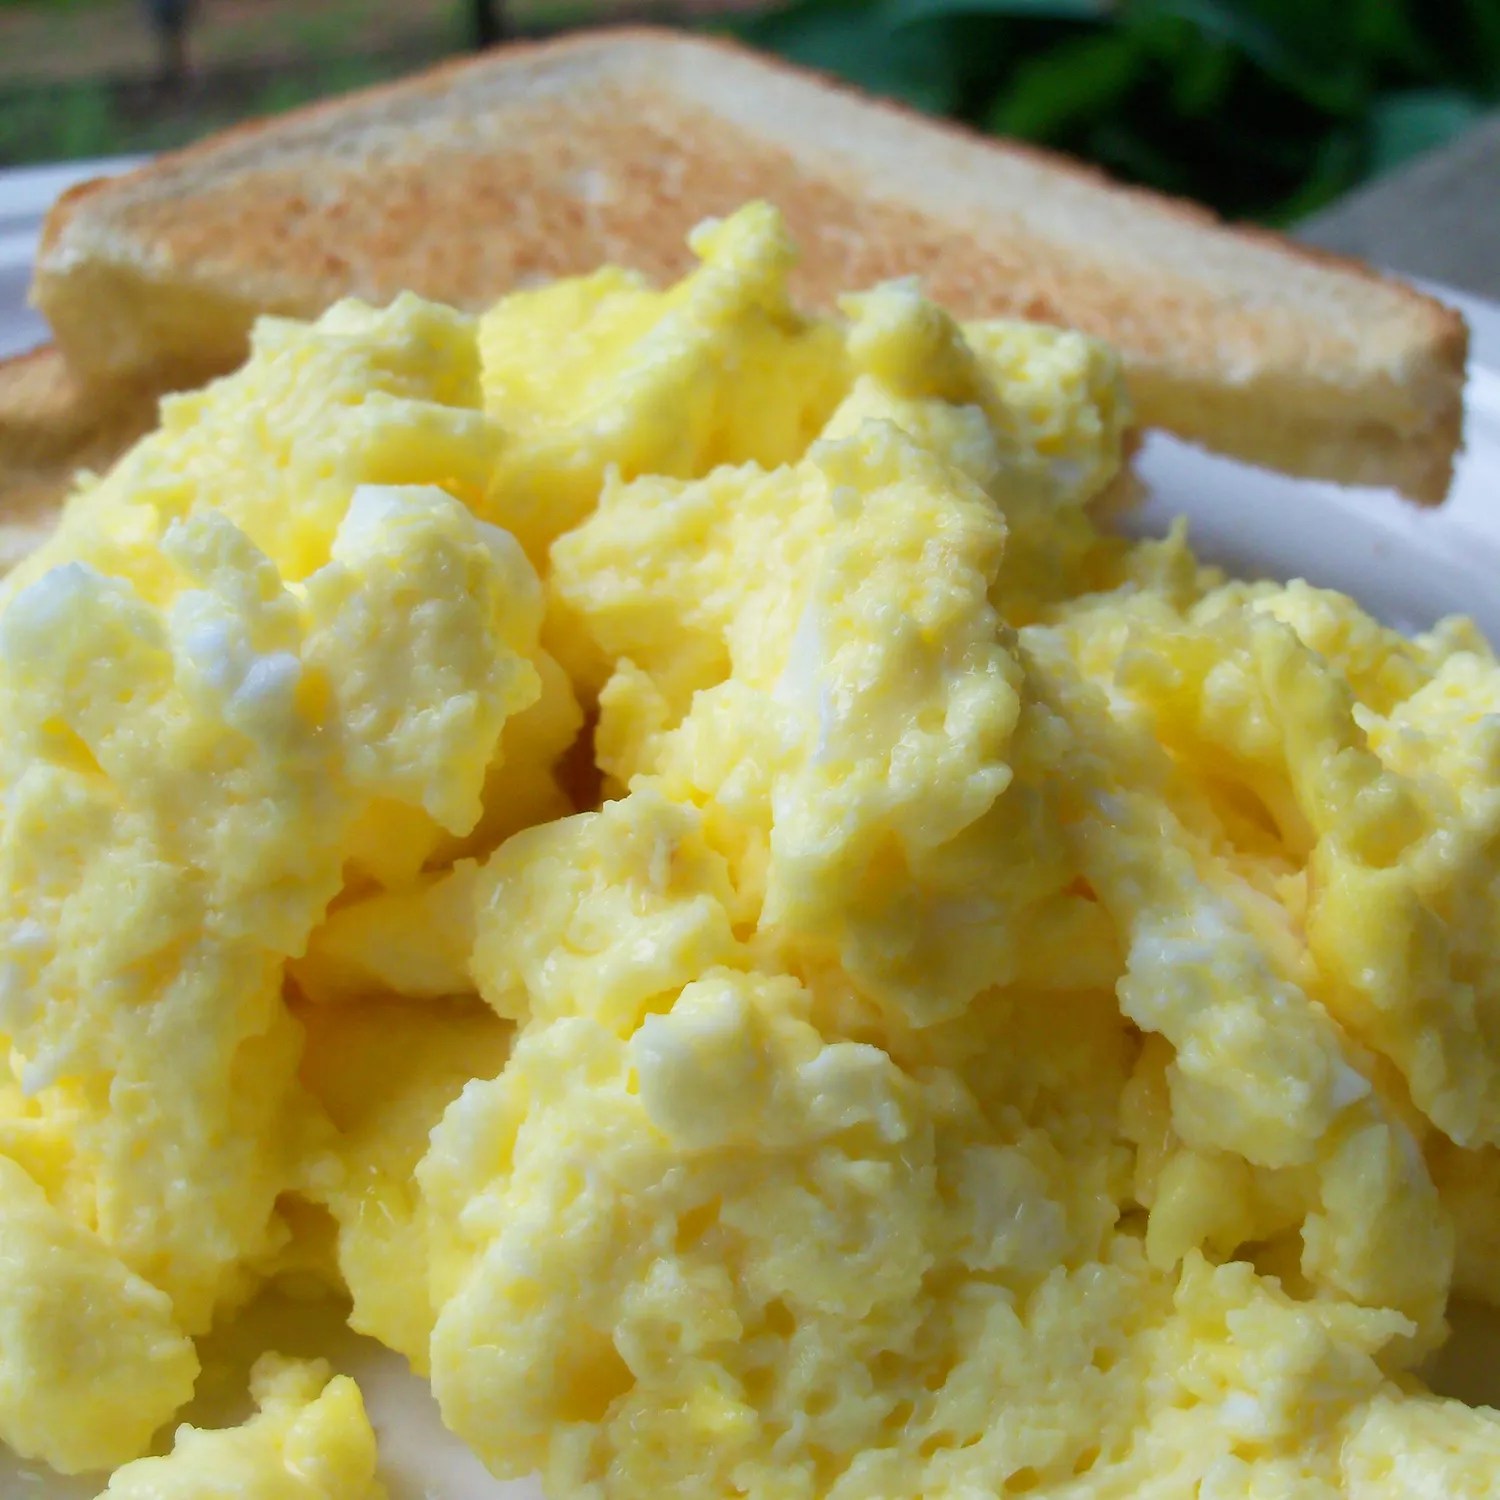 Mind-Blowing Oven Scrambled Eggs!